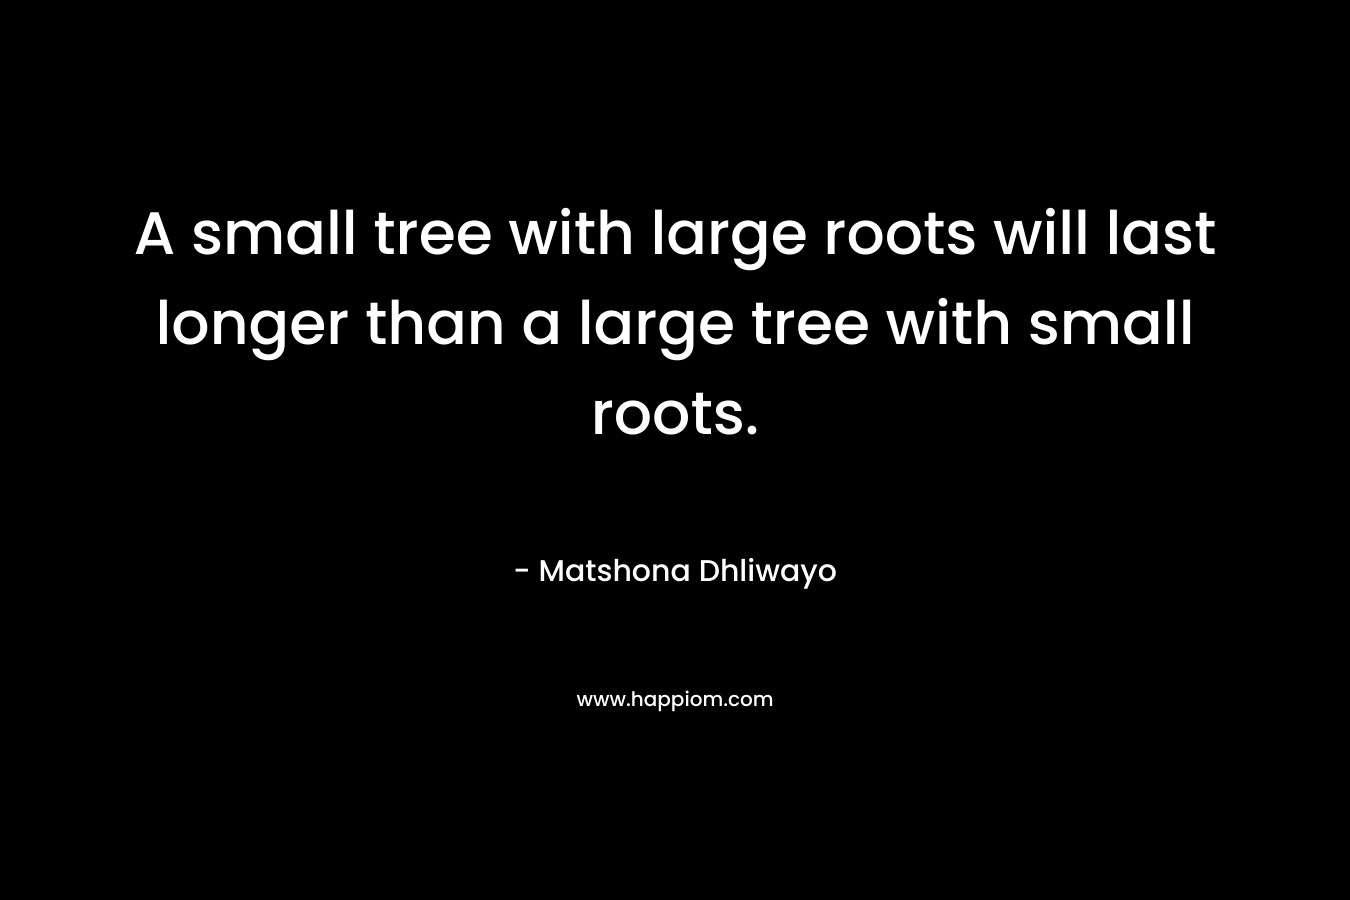 A small tree with large roots will last longer than a large tree with small roots.